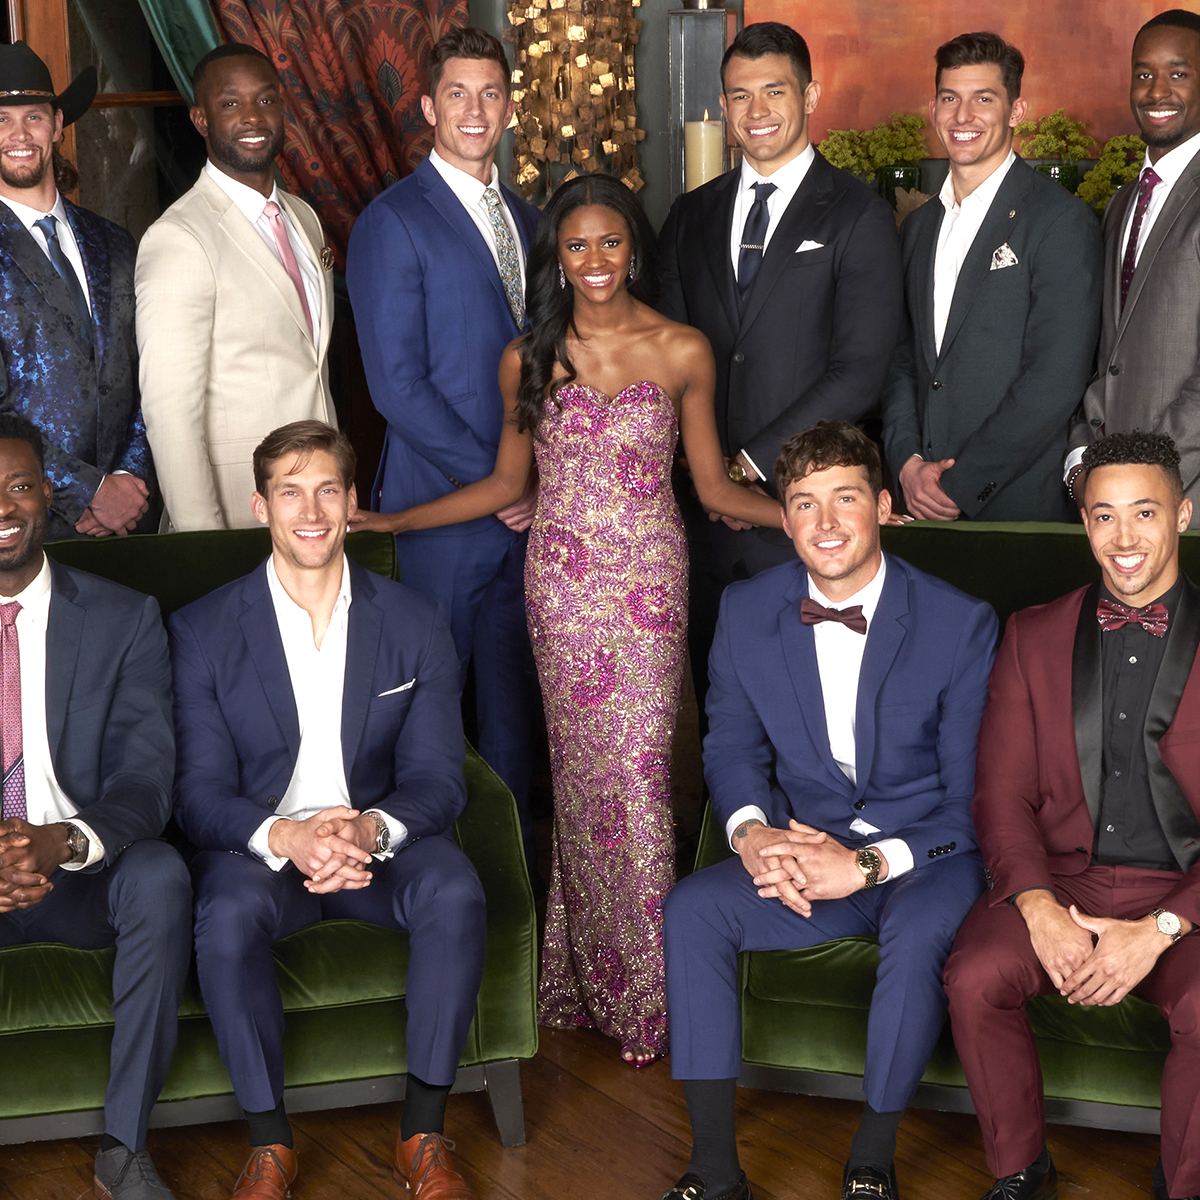 Why Charity Chose That Contestant on The Bachelorette